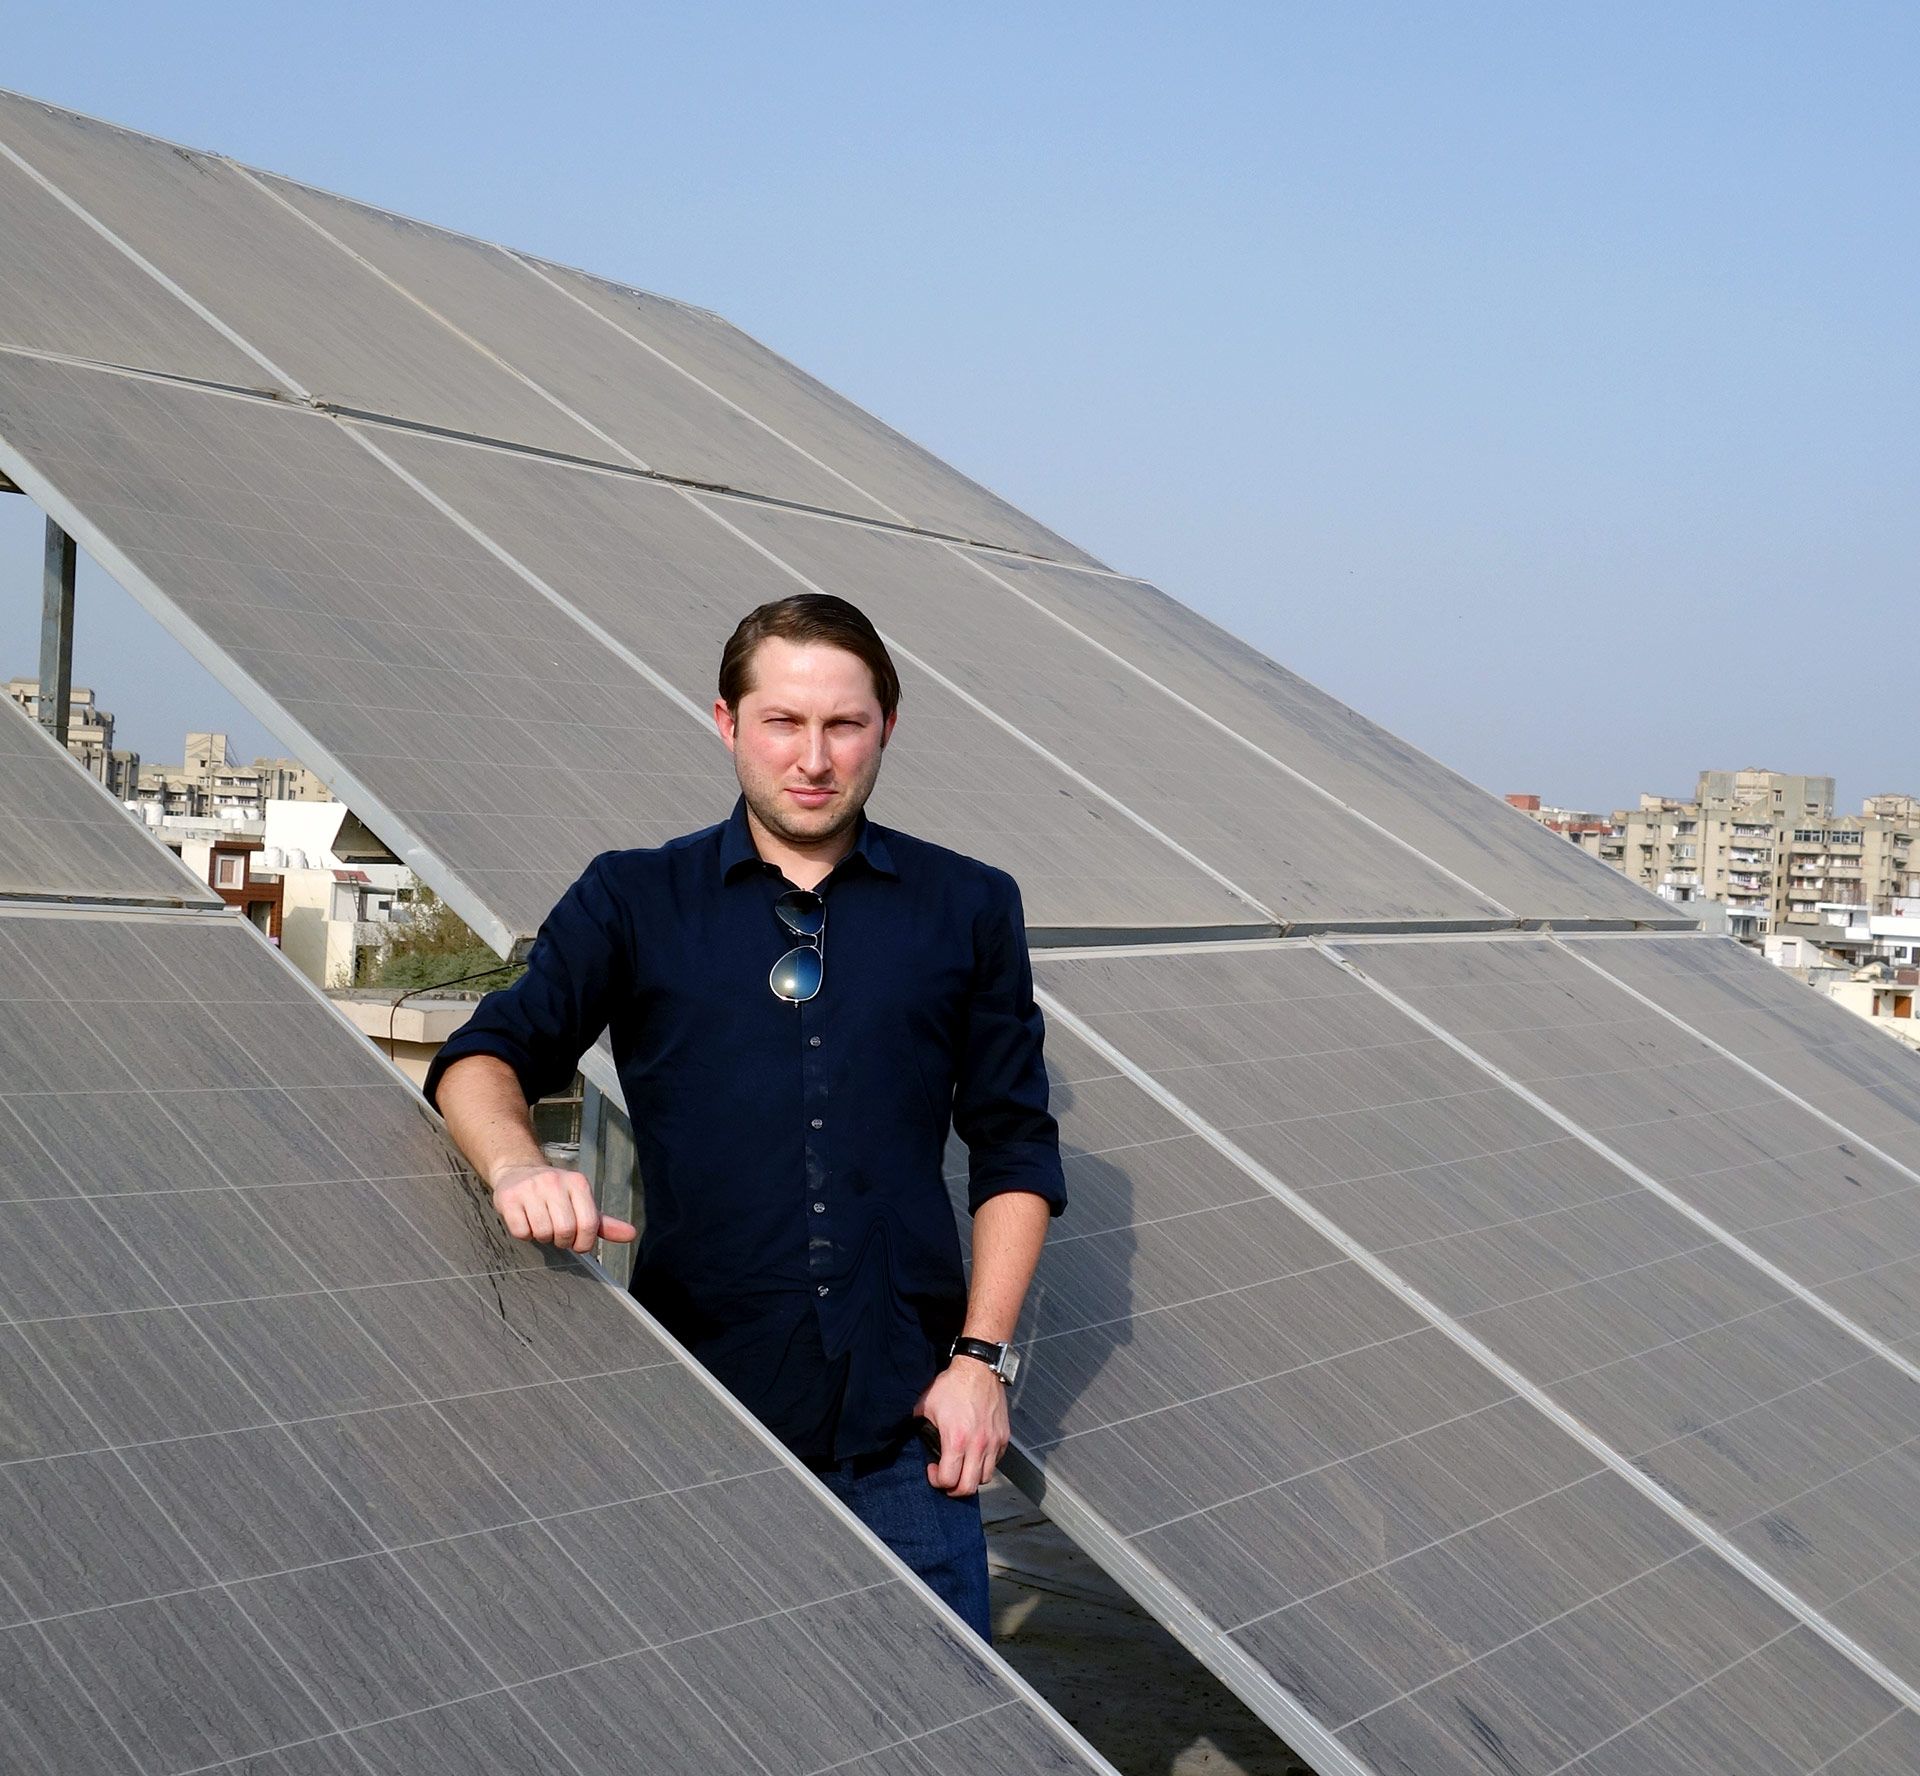 enough solar panels to operate as a zero emission office